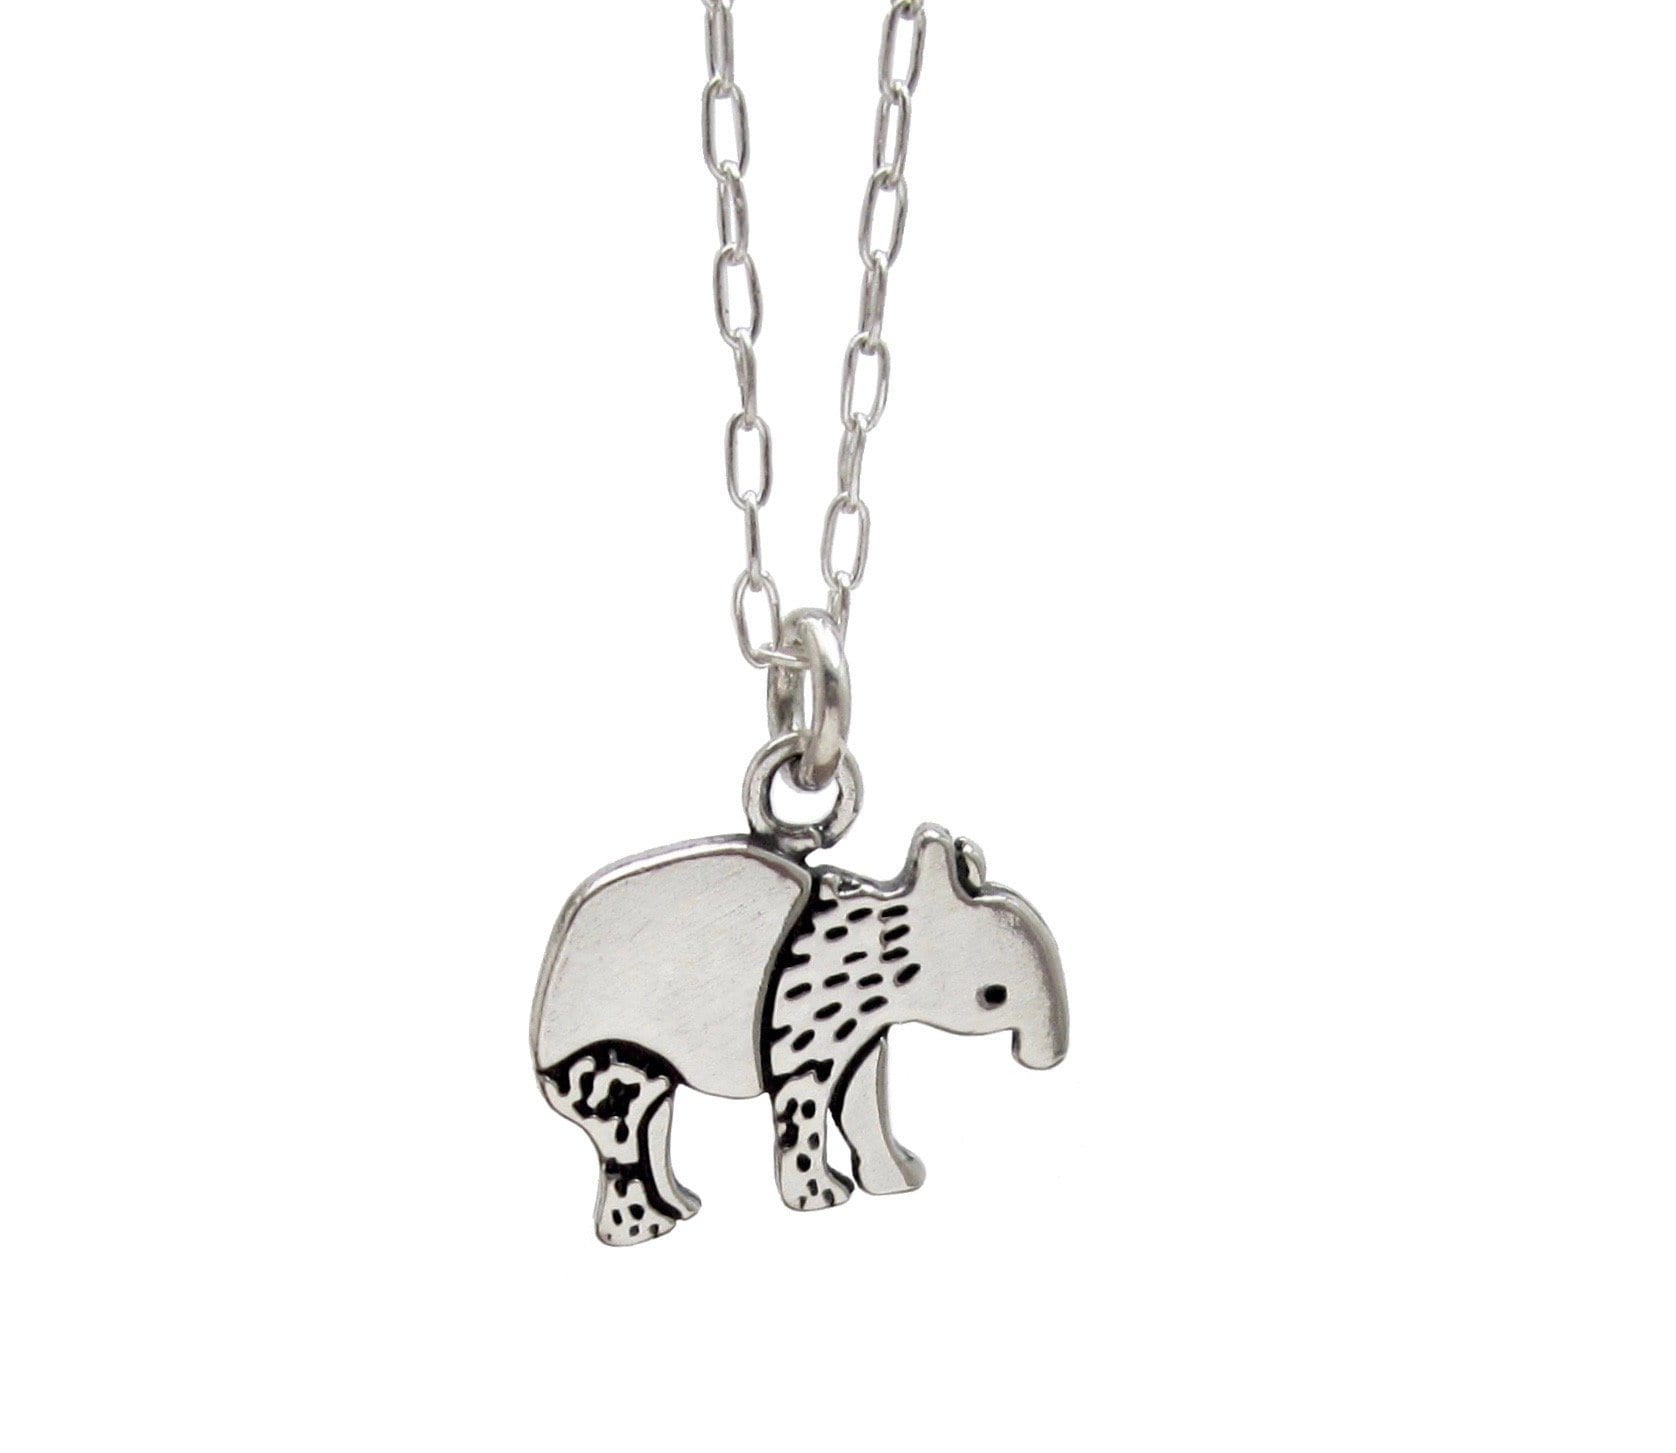 Adorable  Zebra Horse Pendant Necklace Gift Boxed Fast Shipping 